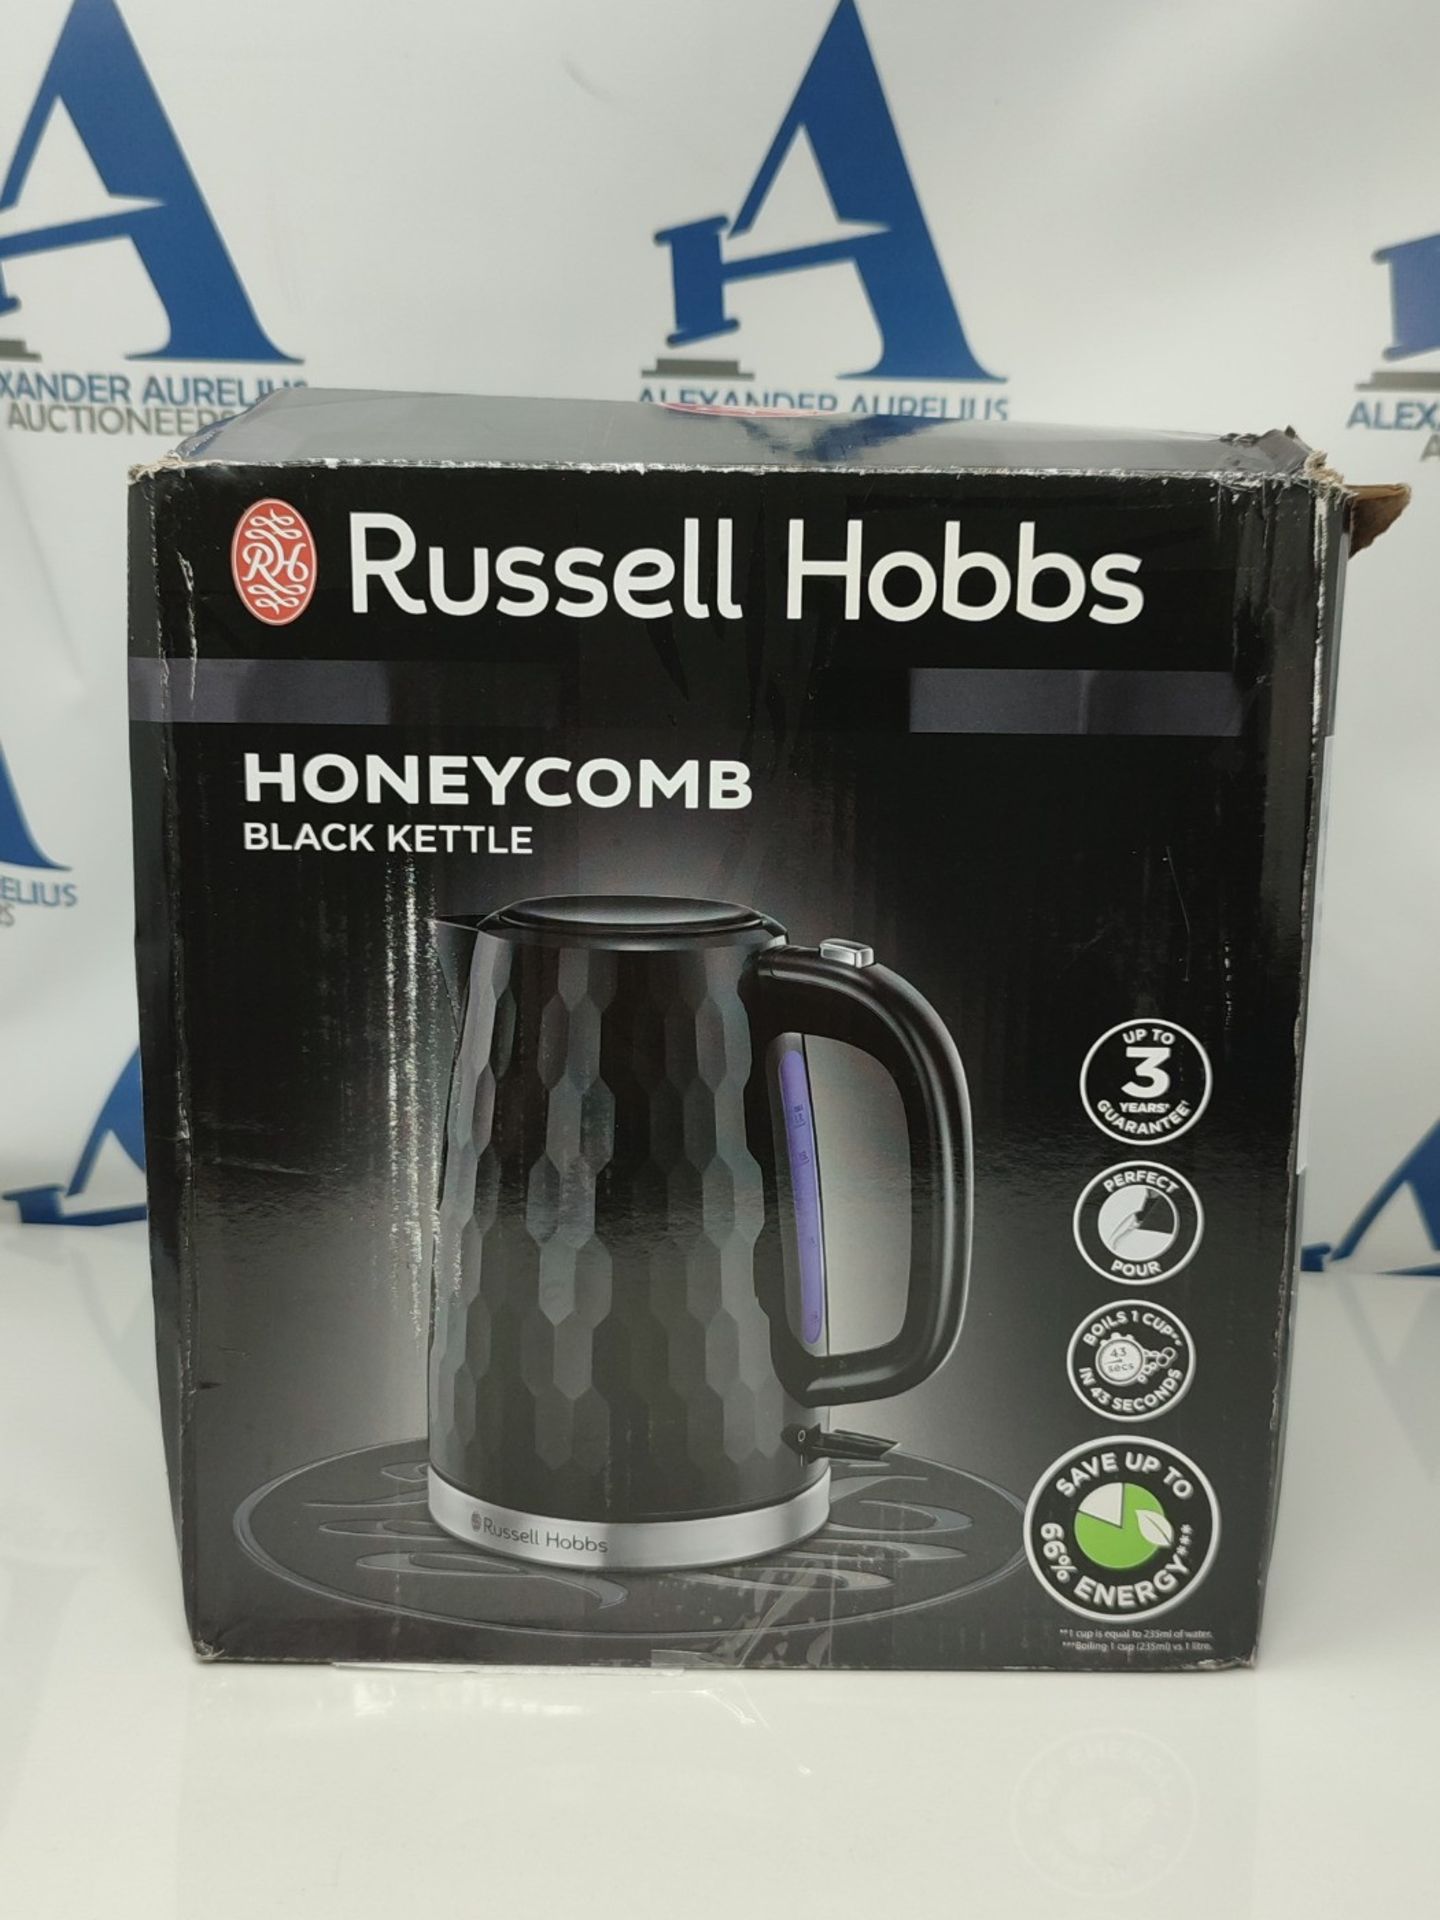 Russell Hobbs 26051 Cordless Electric Kettle - Contemporary Honeycomb Design with Fast